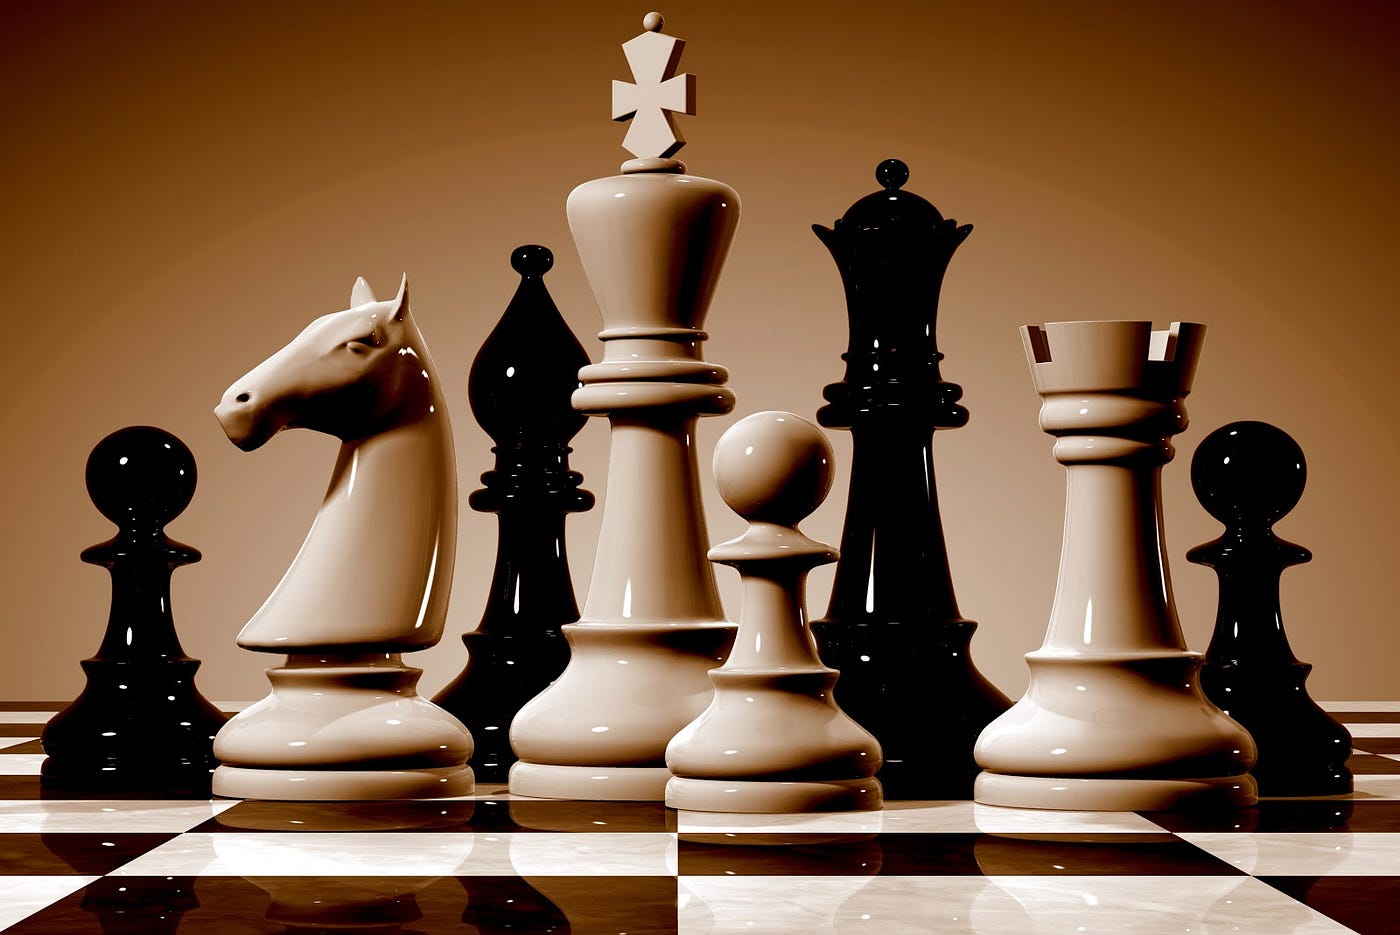 Learn How to Study Annotated Chess Games to improve your game